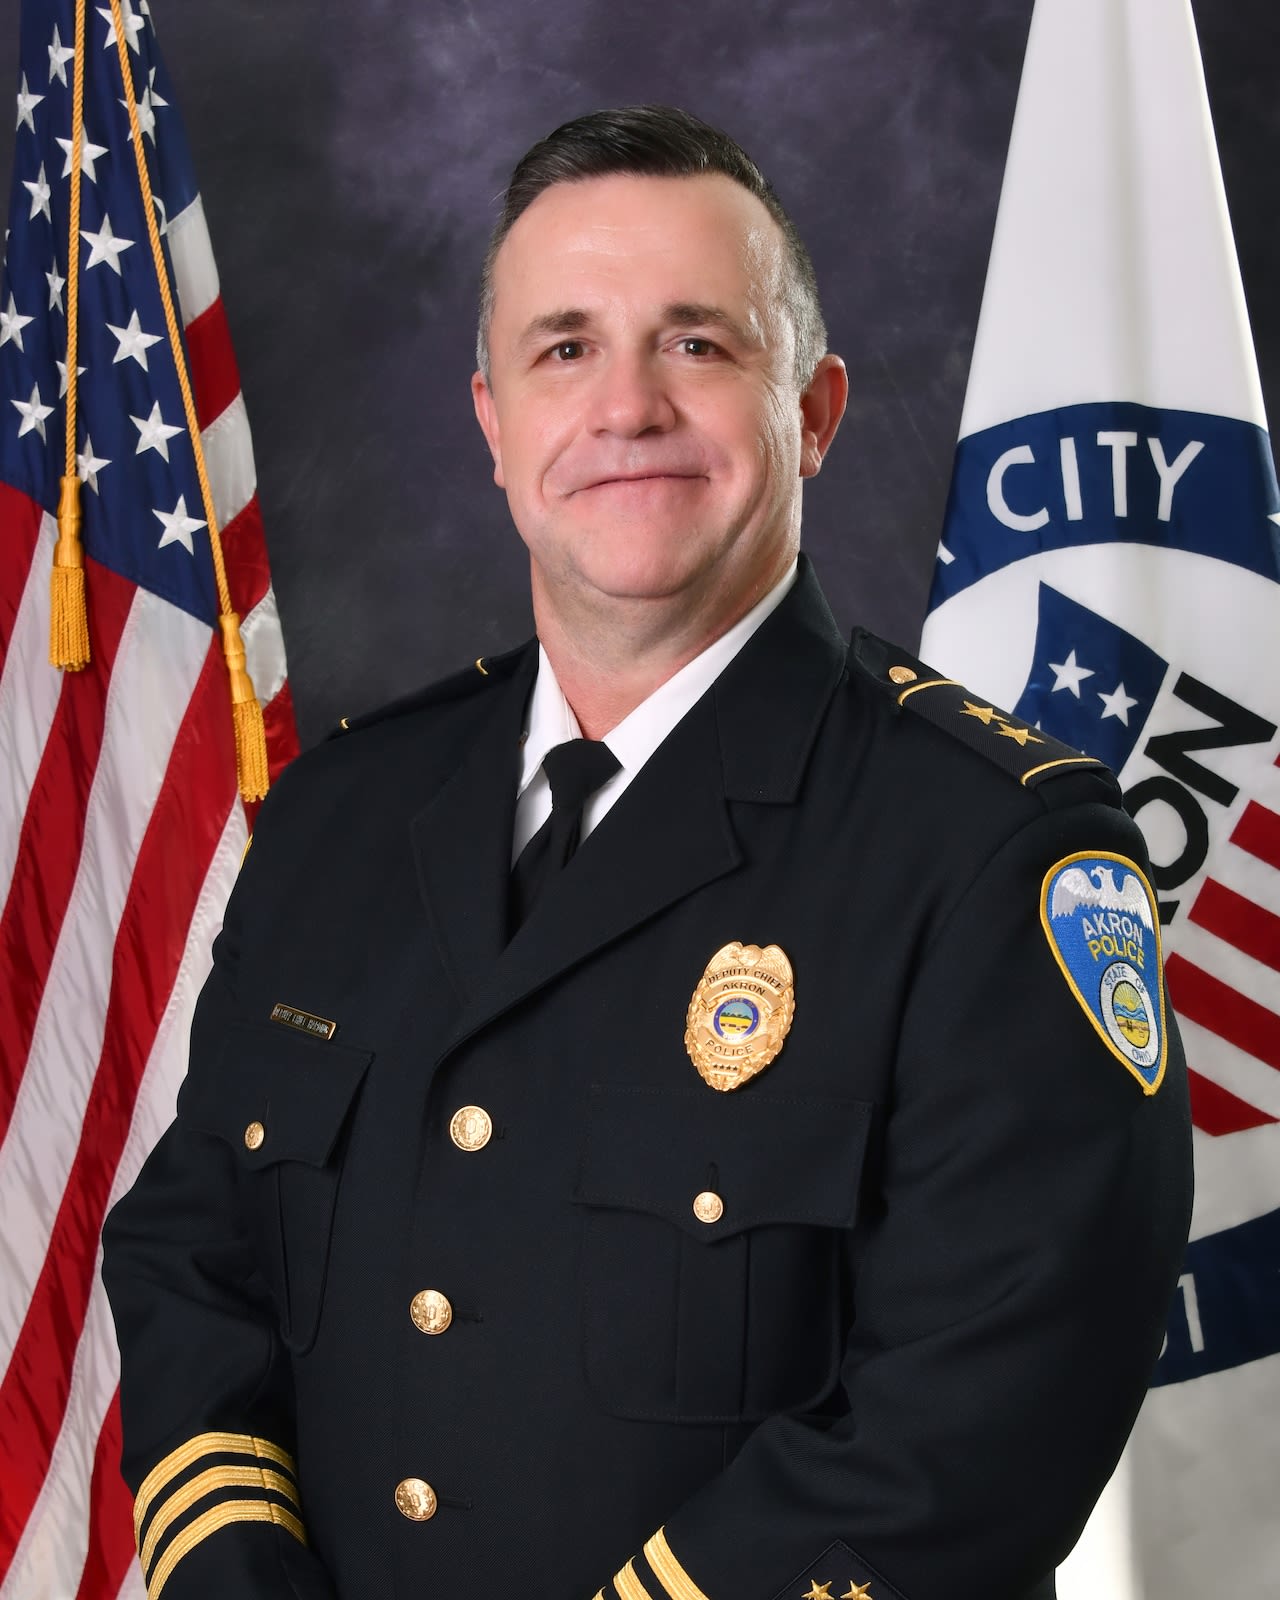 Akron swears in new police chief, as Brian Harding takes the reins of the department